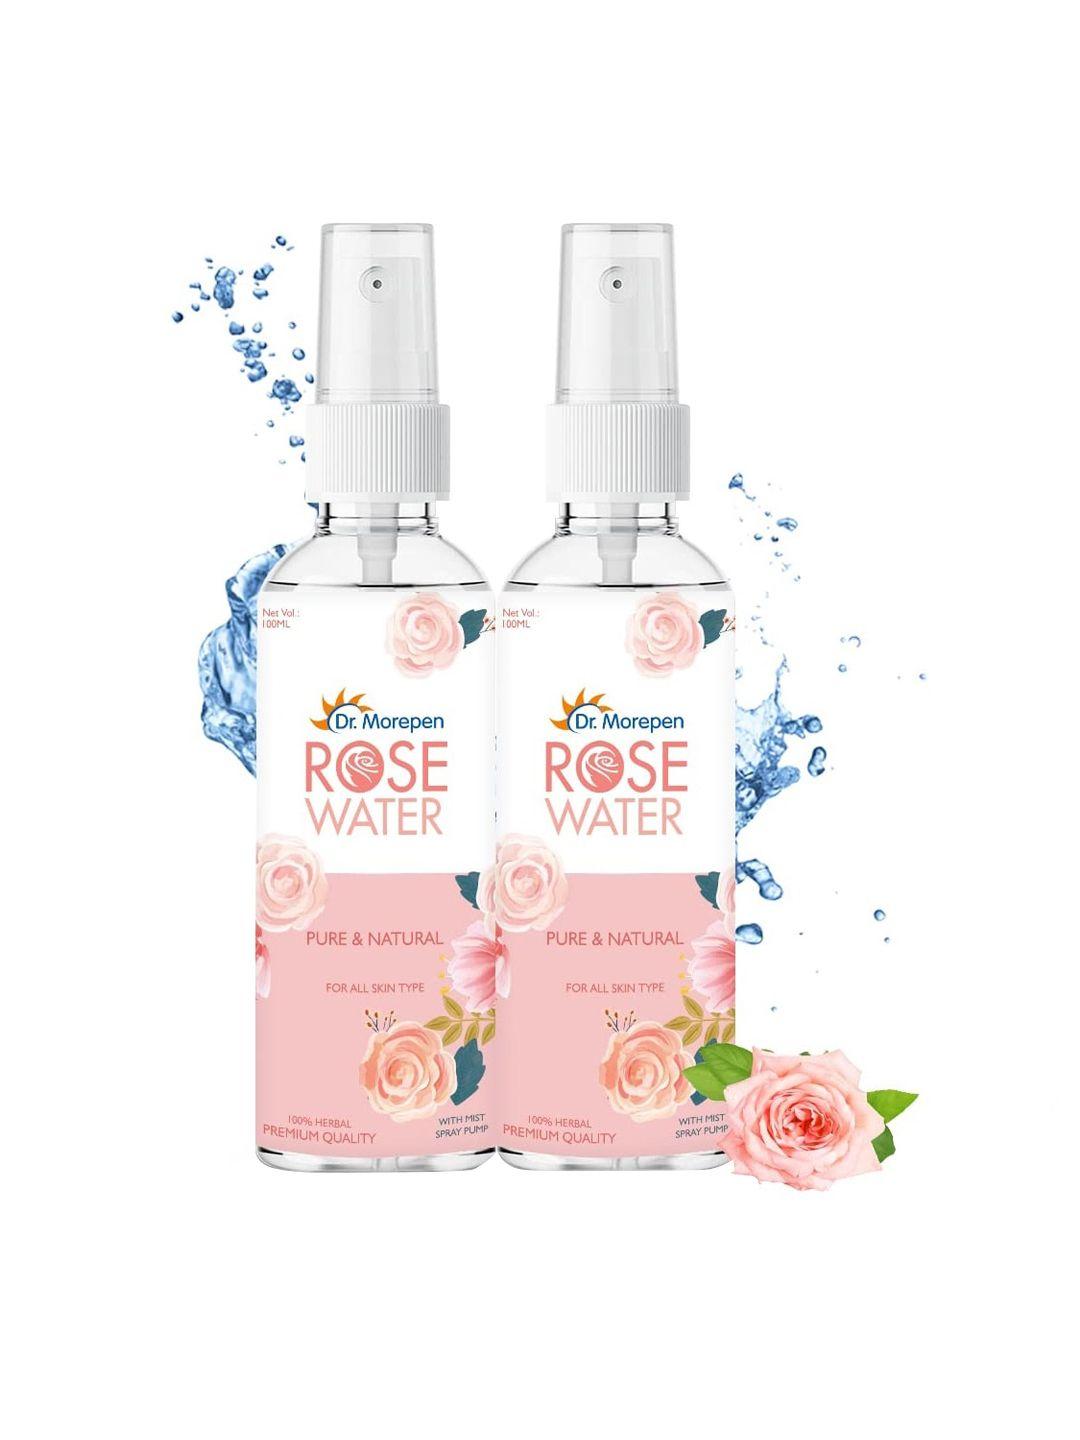 dr. morepen set of 2 pure & natural rose water face toner for all skin types - 100 ml each